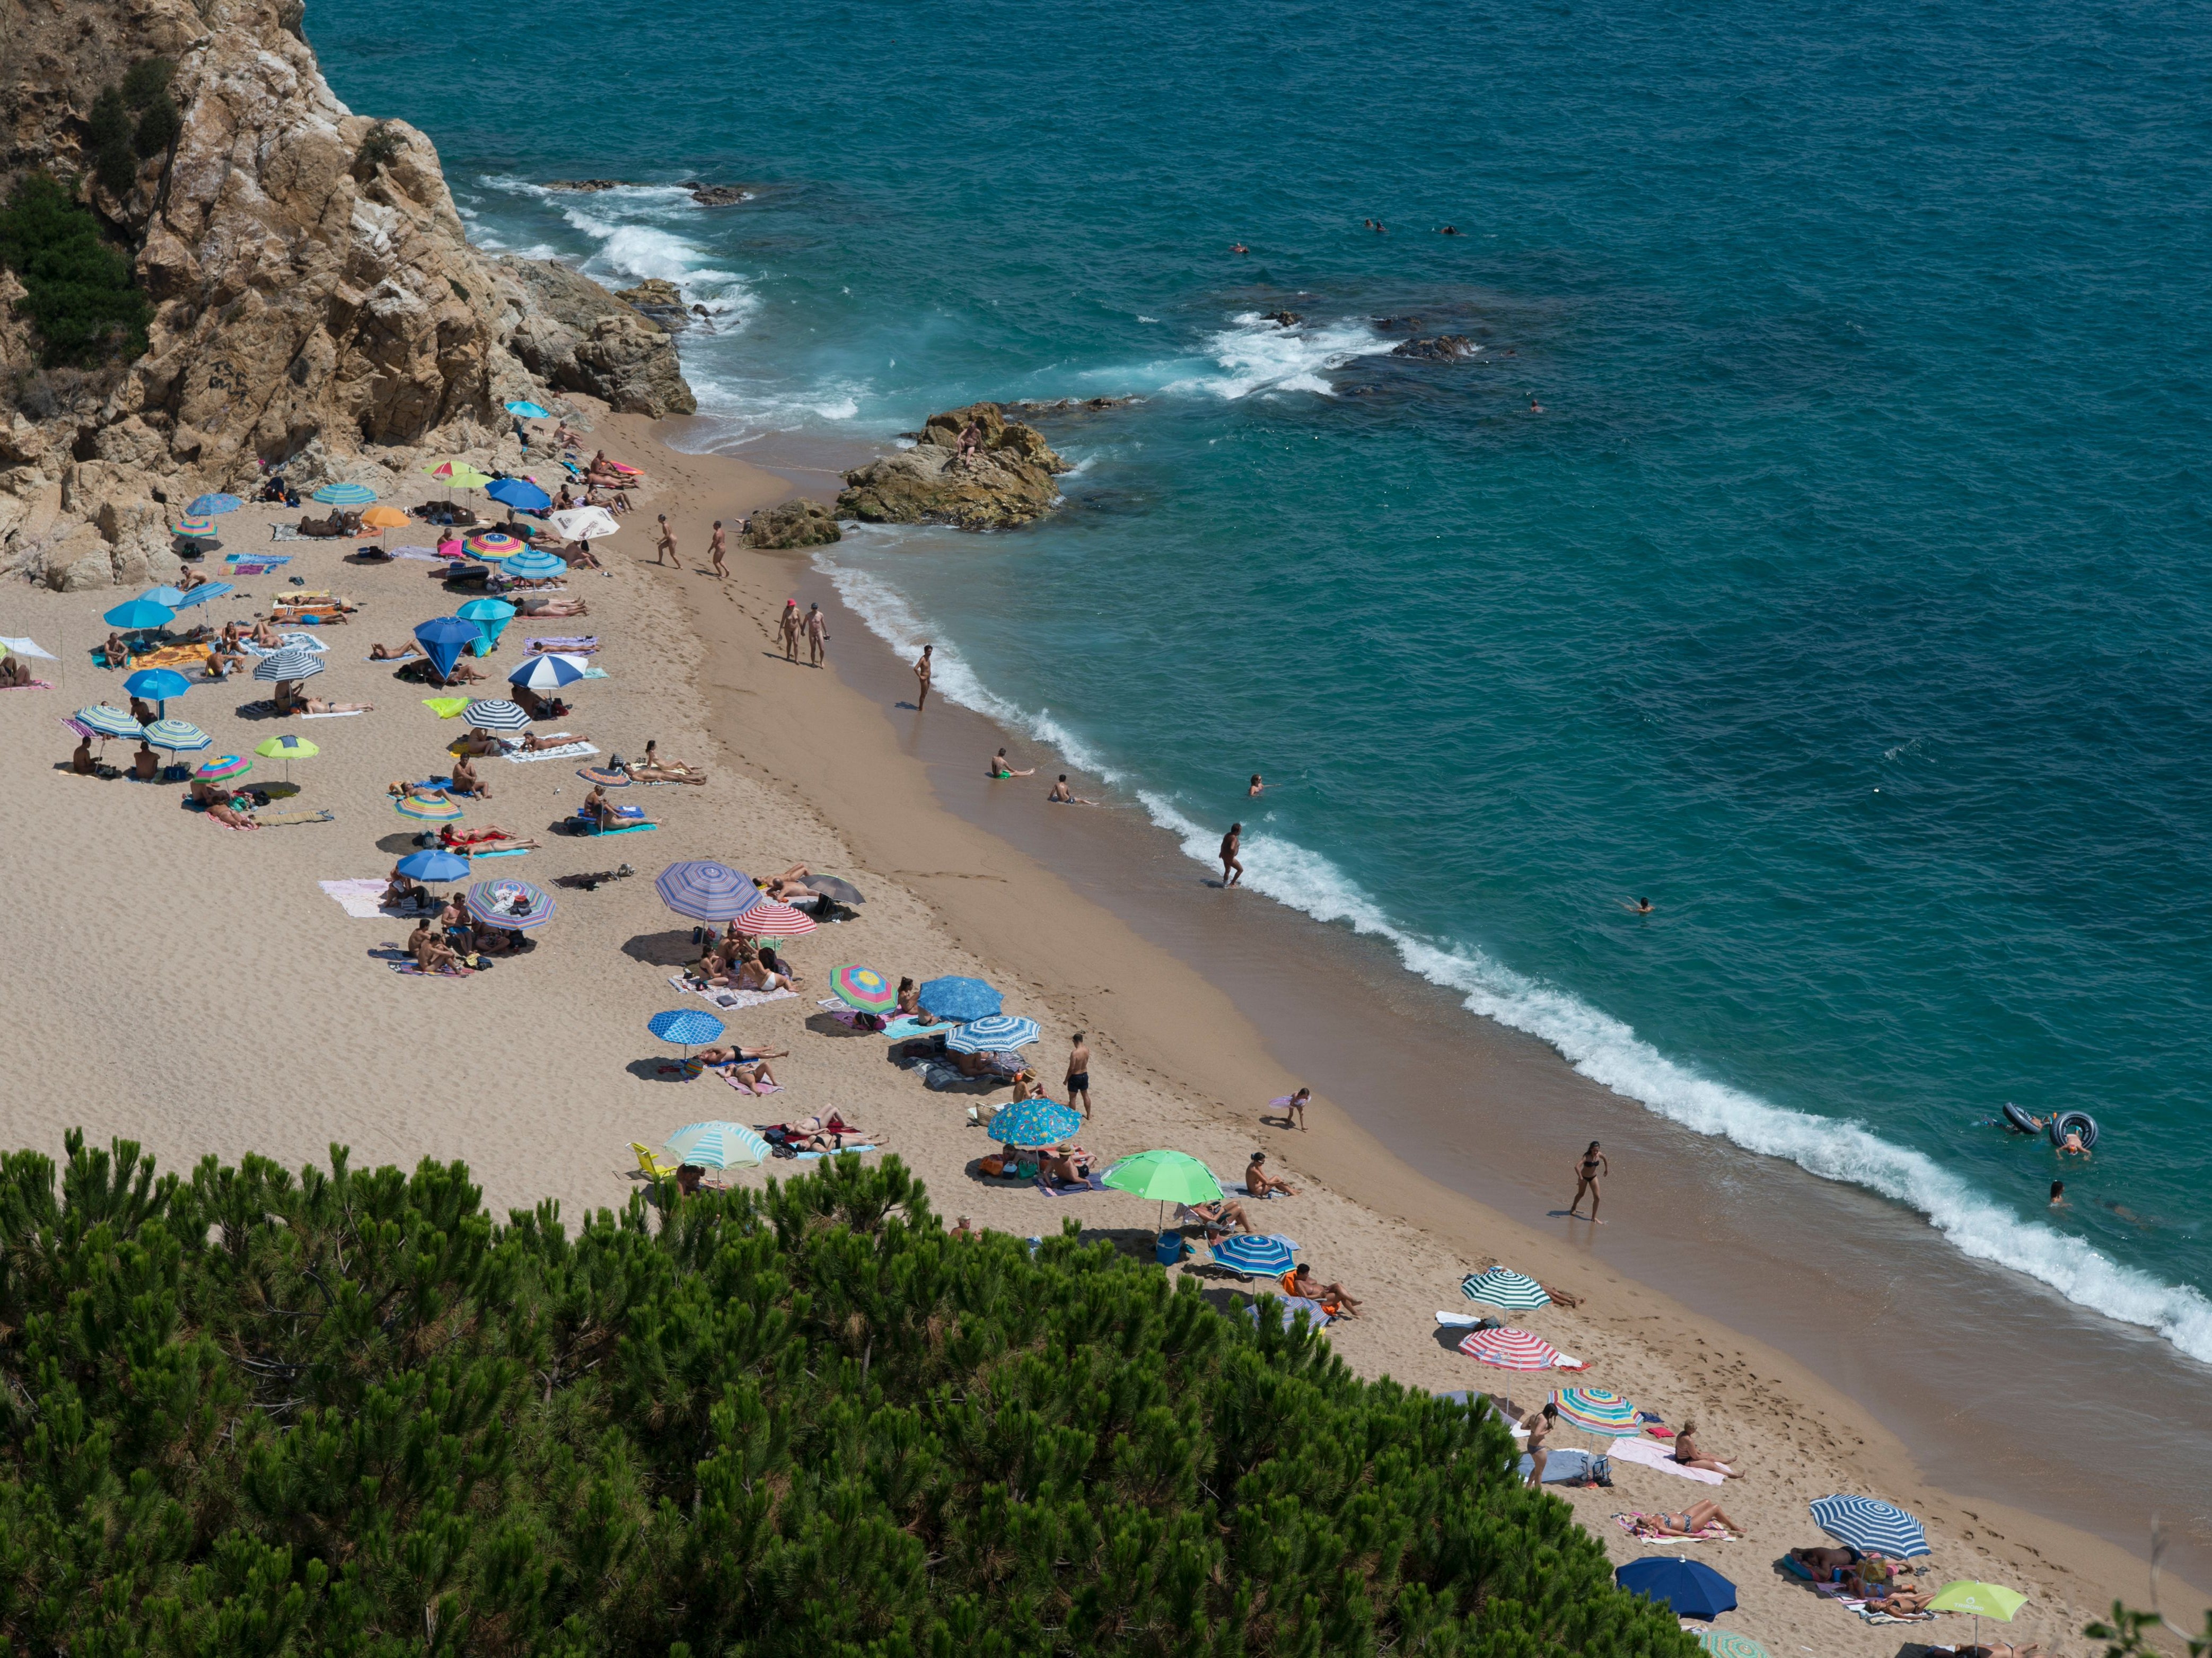 The alleged assault took place in the coastal city of Calella